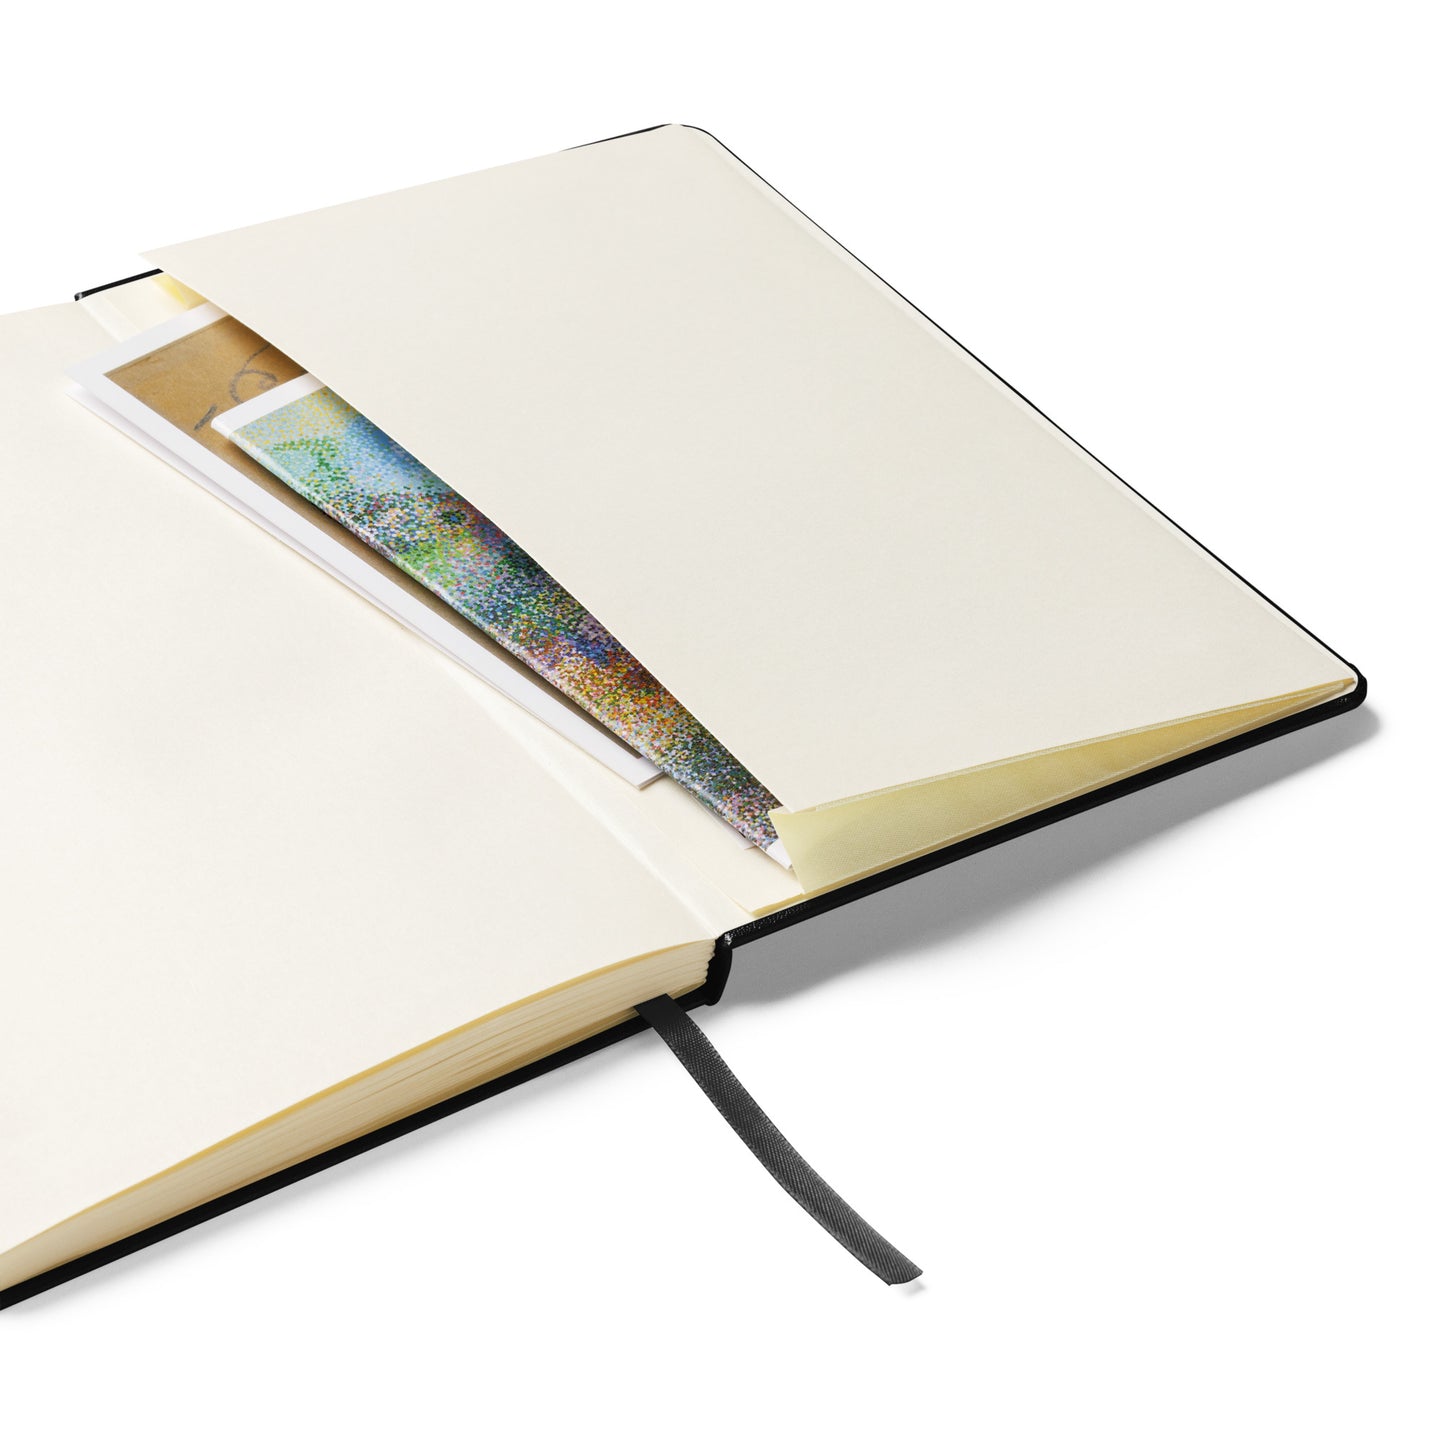 Need Money for Aussie | Hardcover Notebook